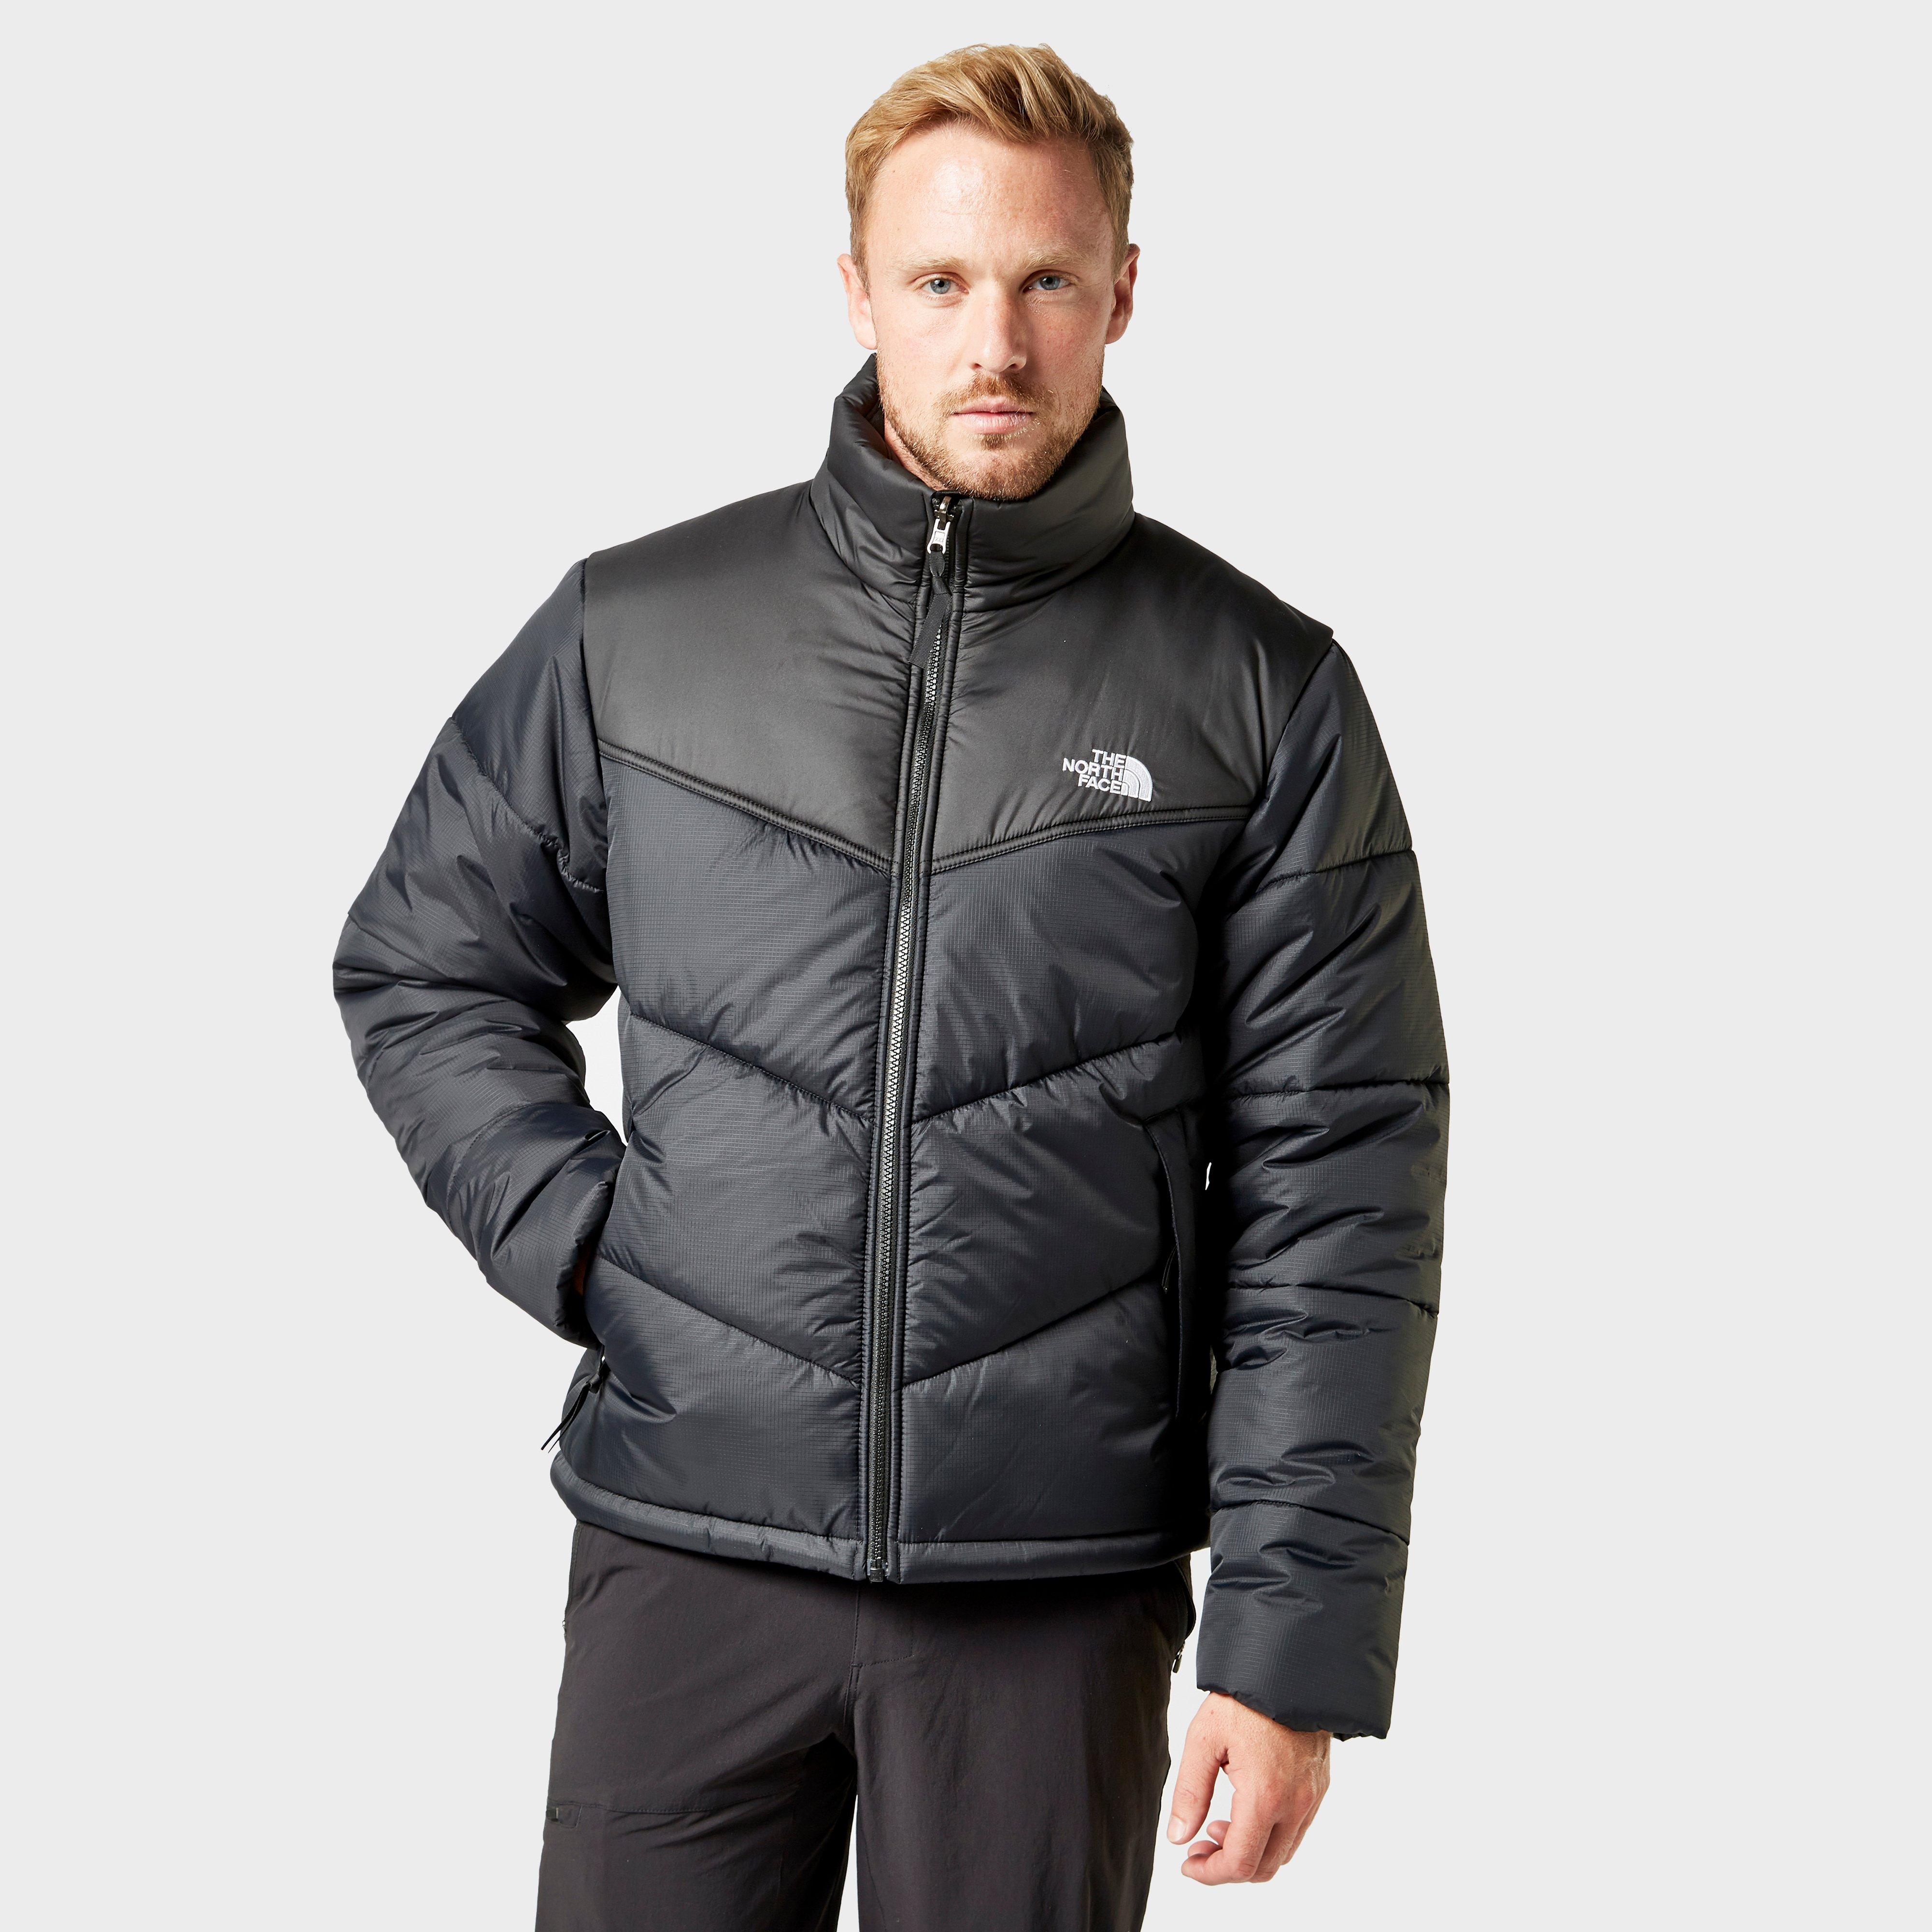 north face insulated jacket sale